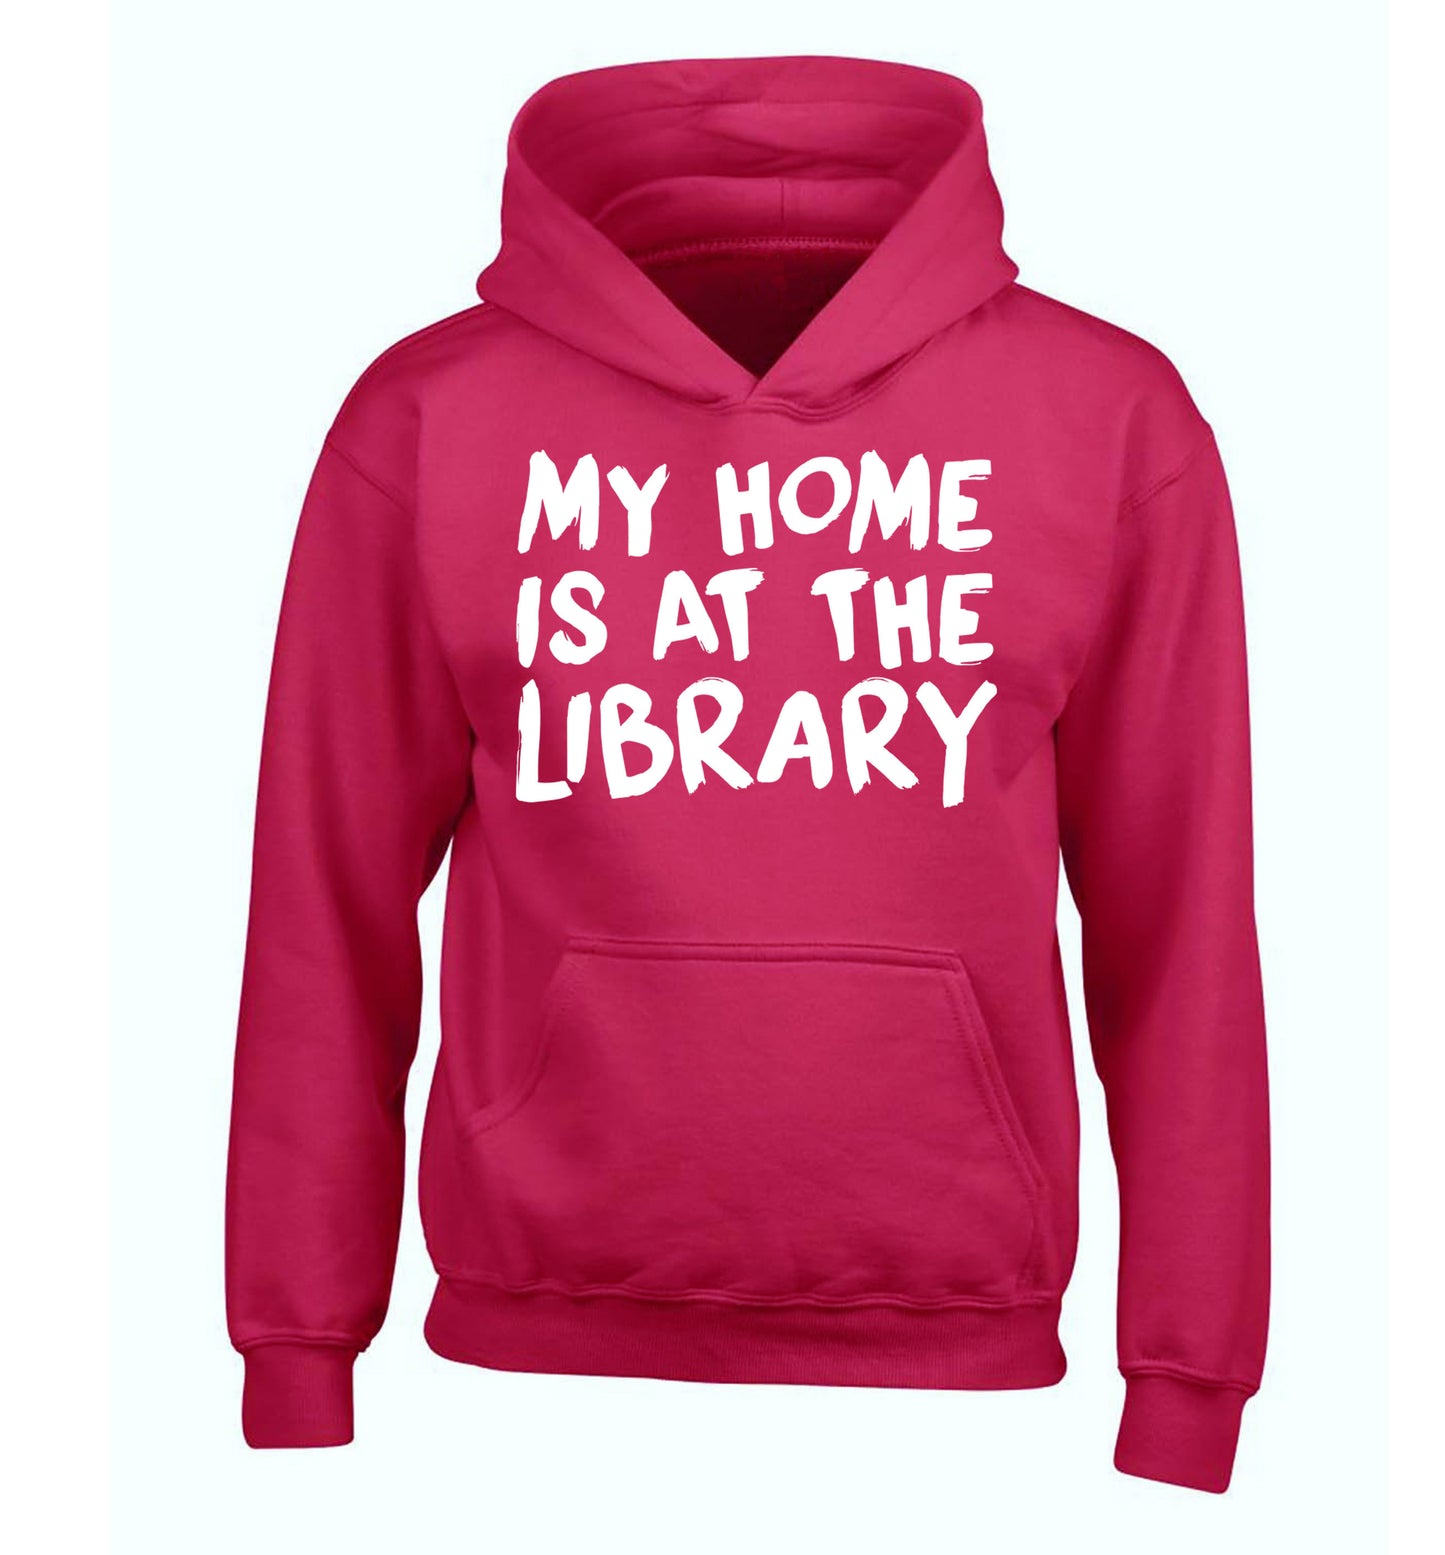 My home is at the library children's pink hoodie 12-14 Years